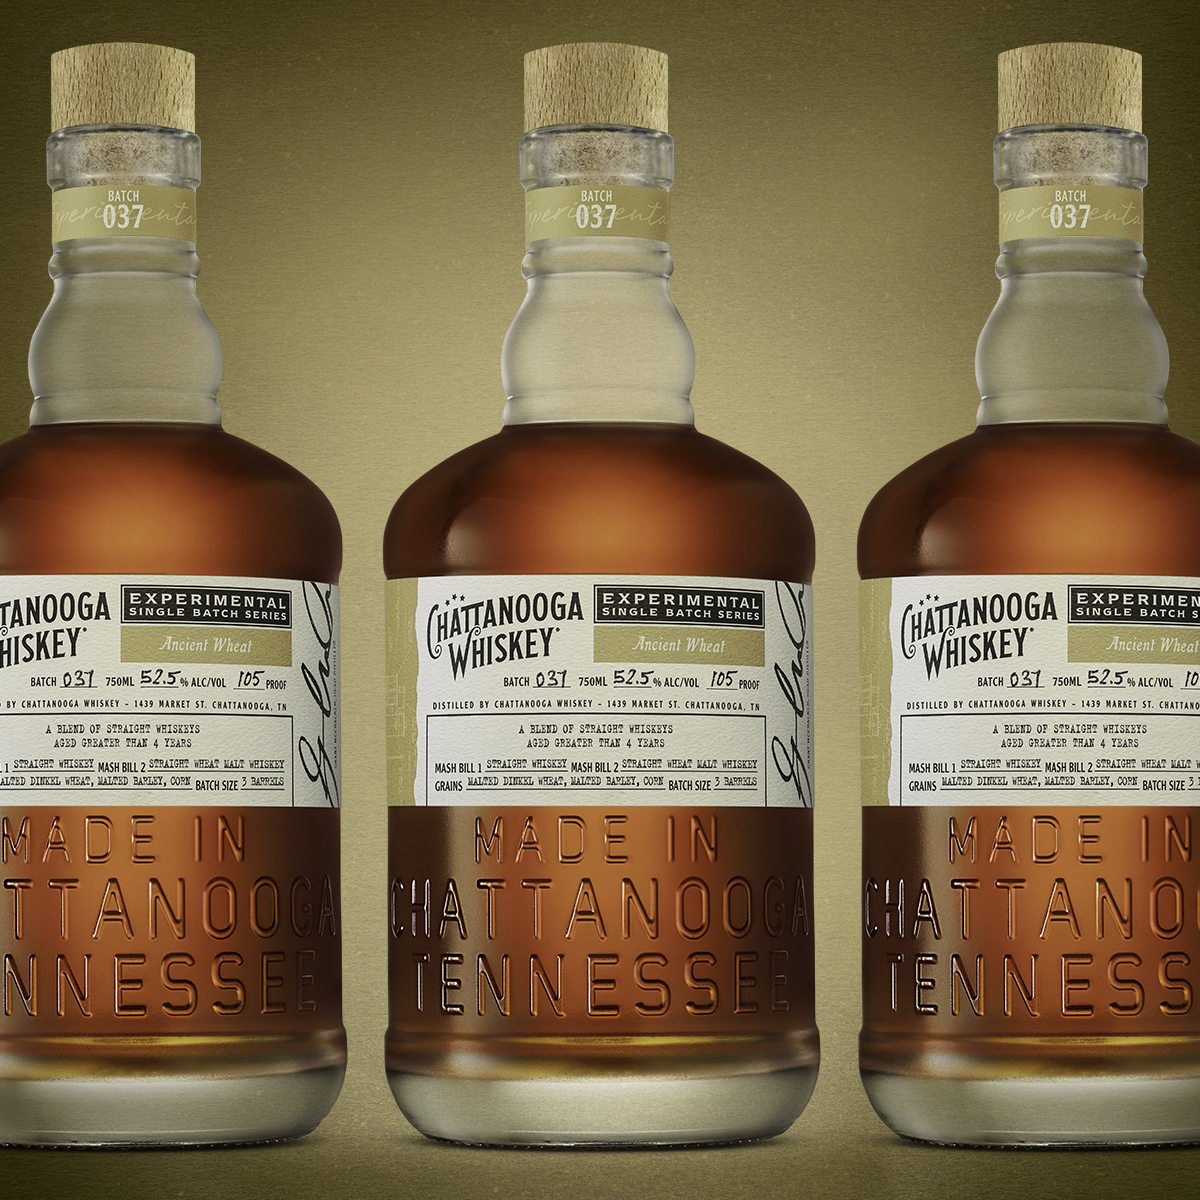 Chattanooga Whiskey Releases New Experimental Batch Showcasing Ancient Grain